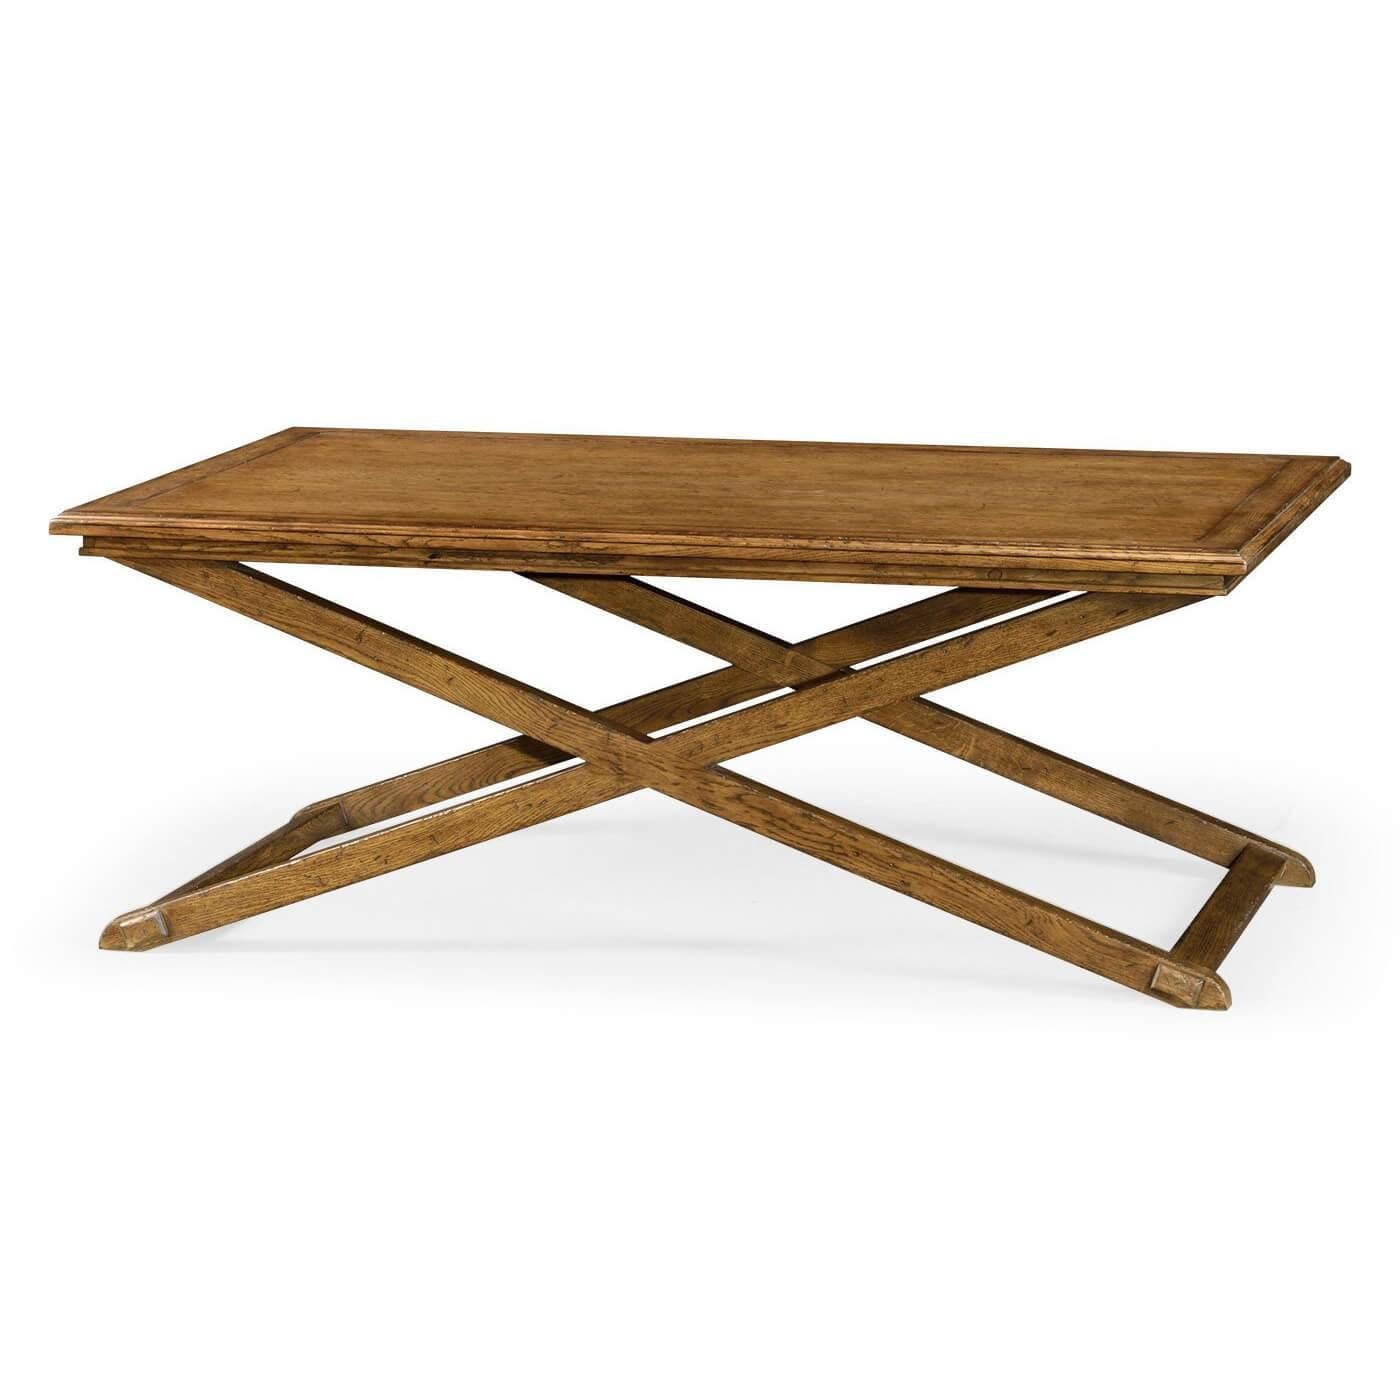 Rectangular light brown chestnut tray top coffee table with a parquetry top tray, and an X-form base.
Dimensions: 52